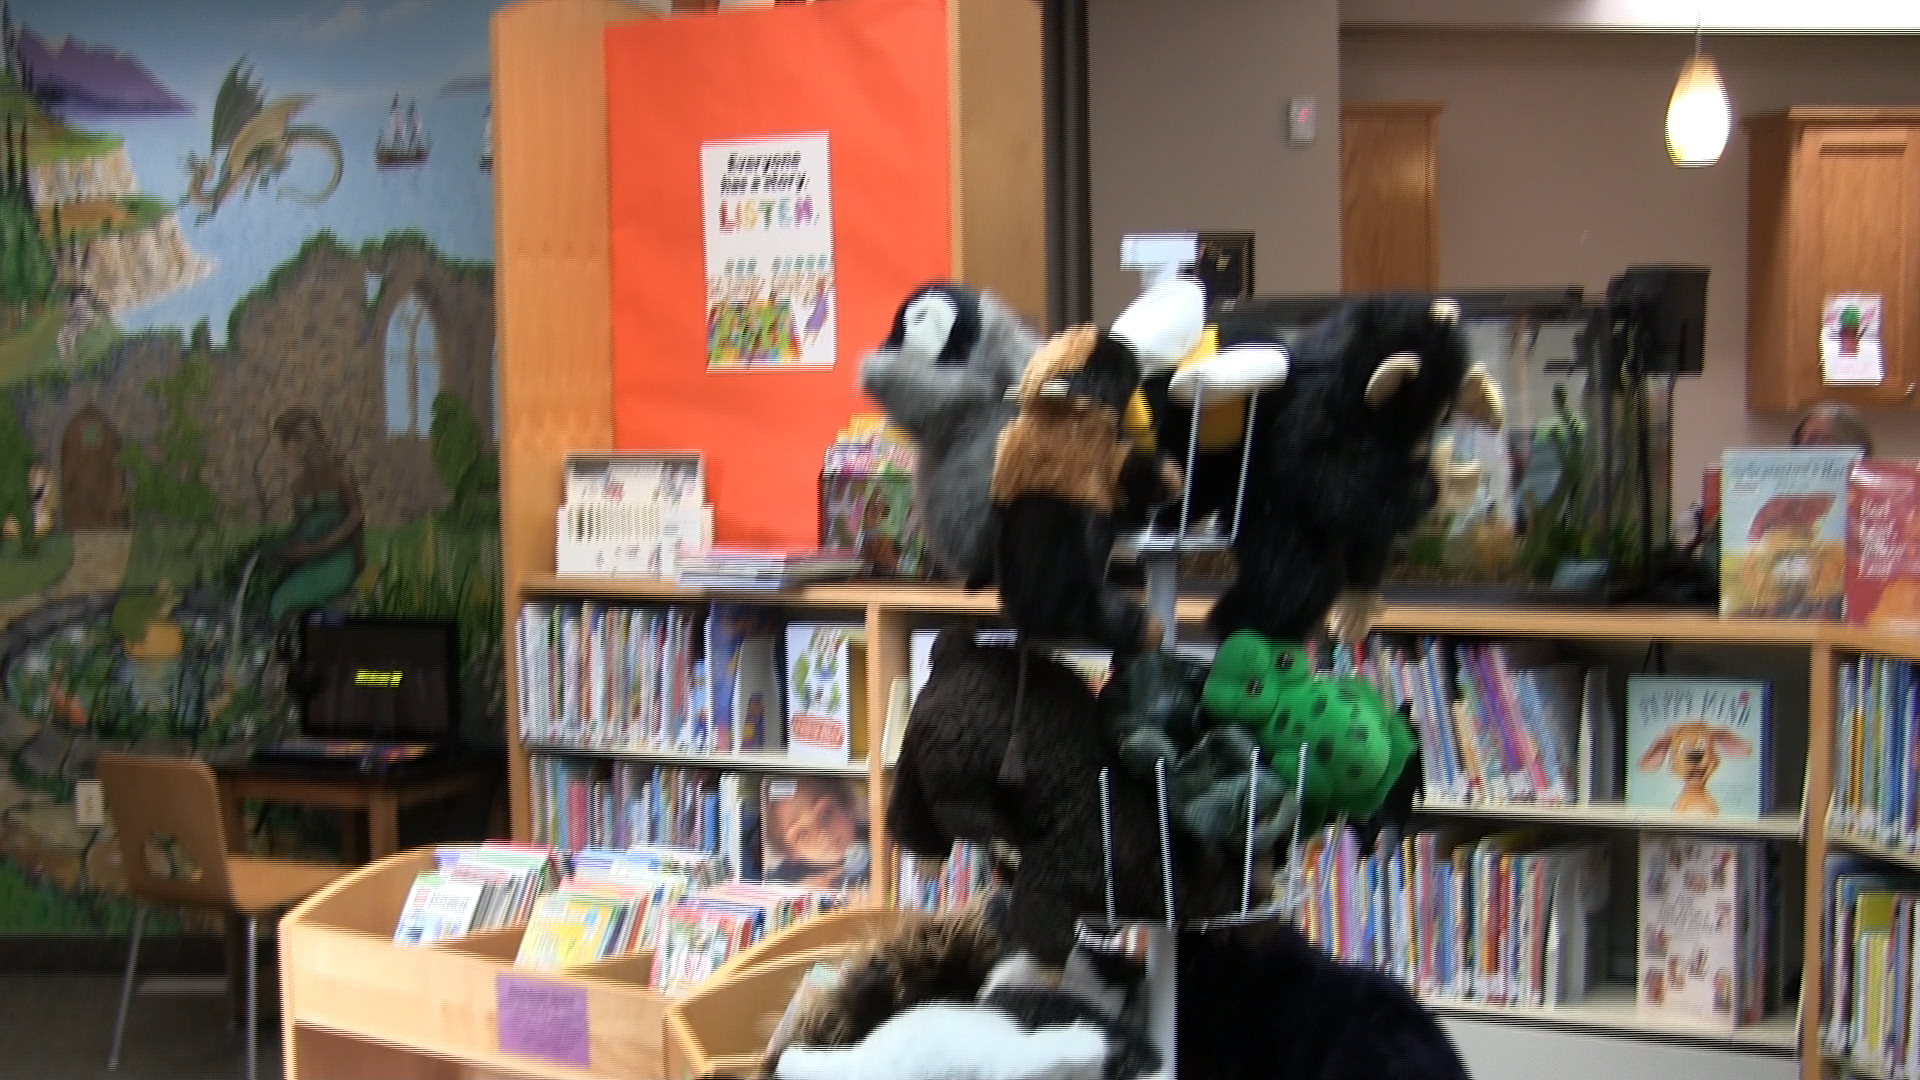 Childrens area with books and stuffed animals